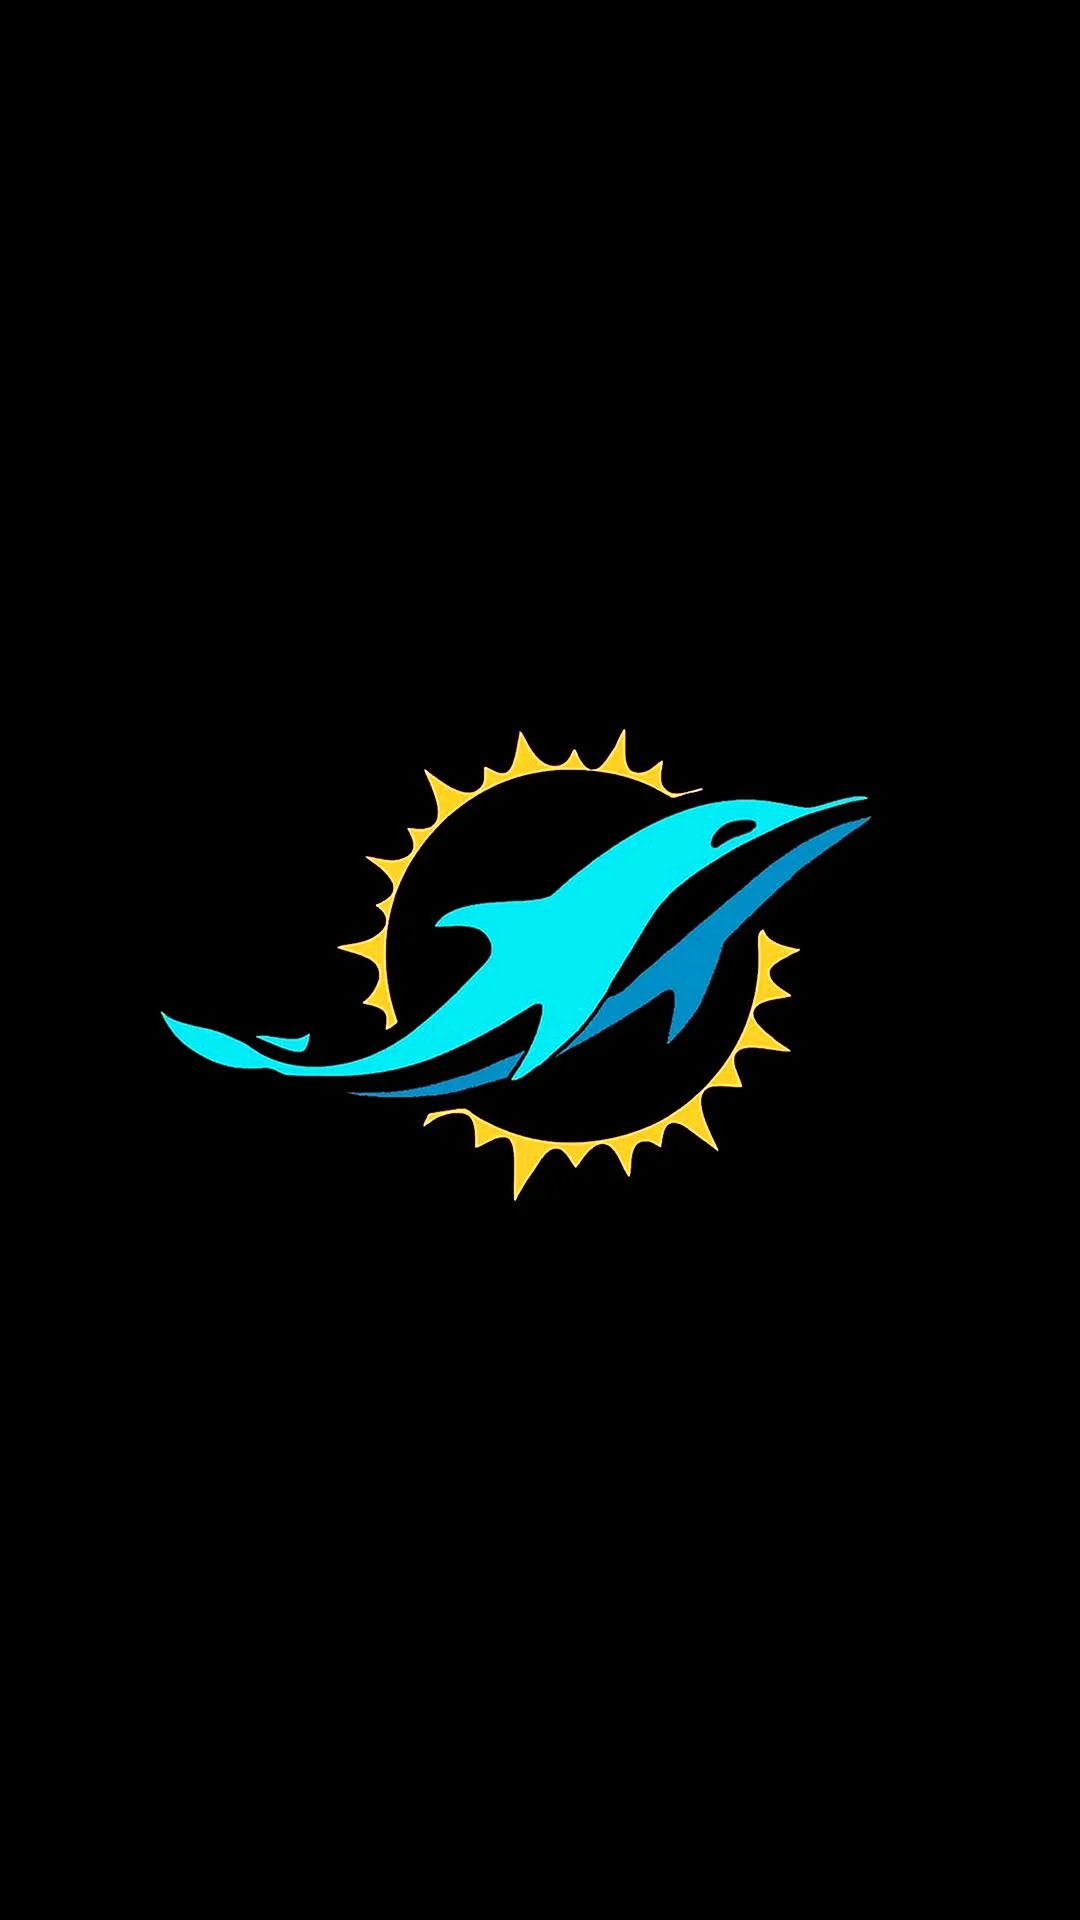 Miami Dolphins Logo Phone Wallpaper For iPhone